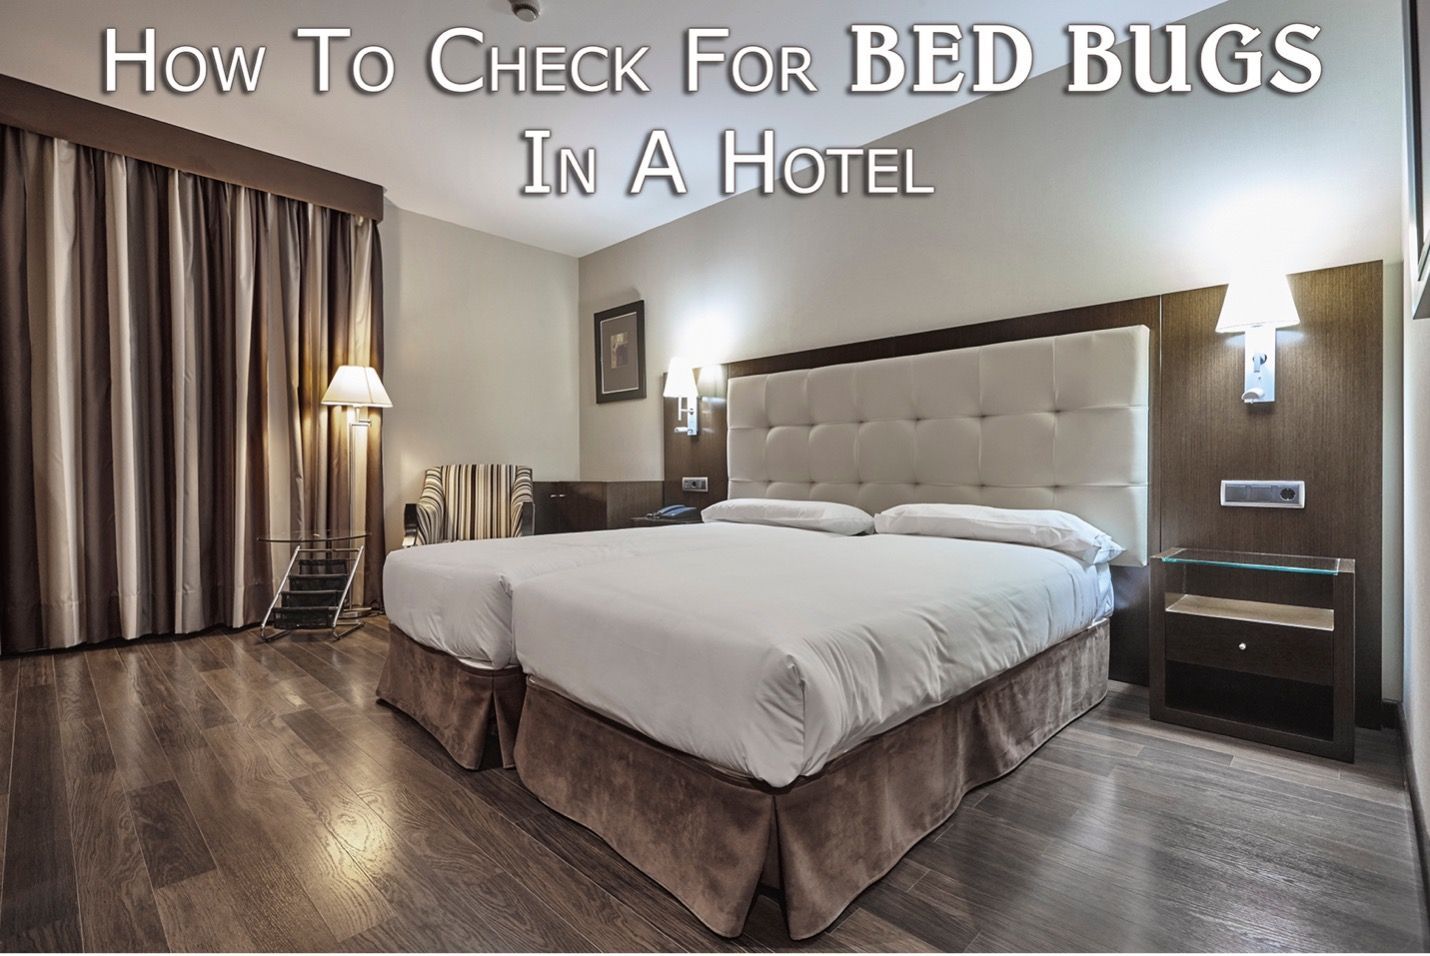 How To Check For Bed Bugs At A Hotel